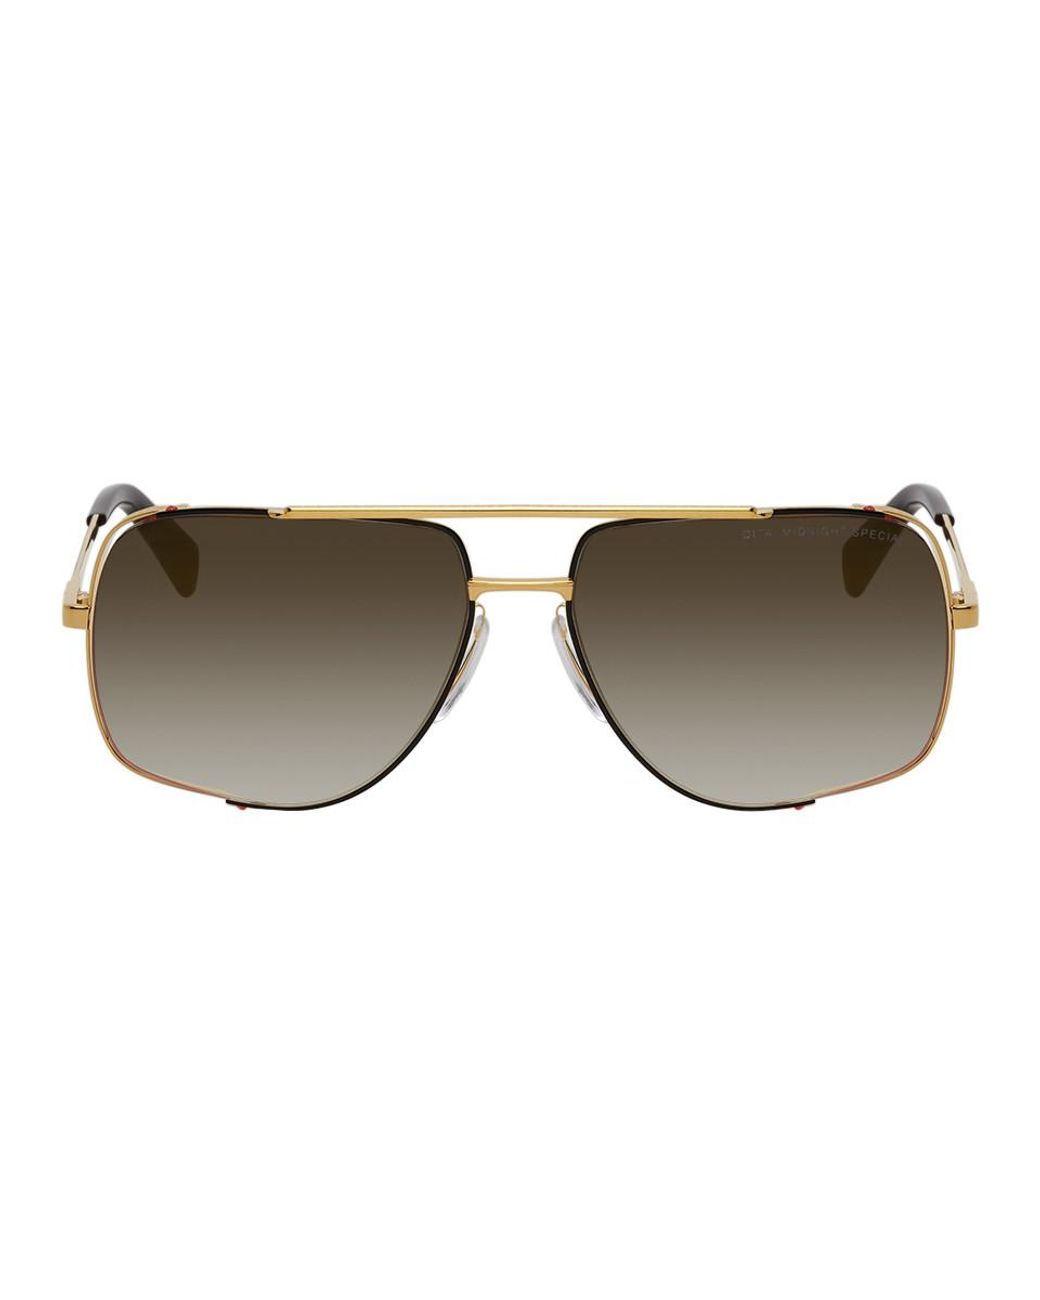 Dita Eyewear Rubber Gold And Grey Midnight Special Sunglasses for Men ...